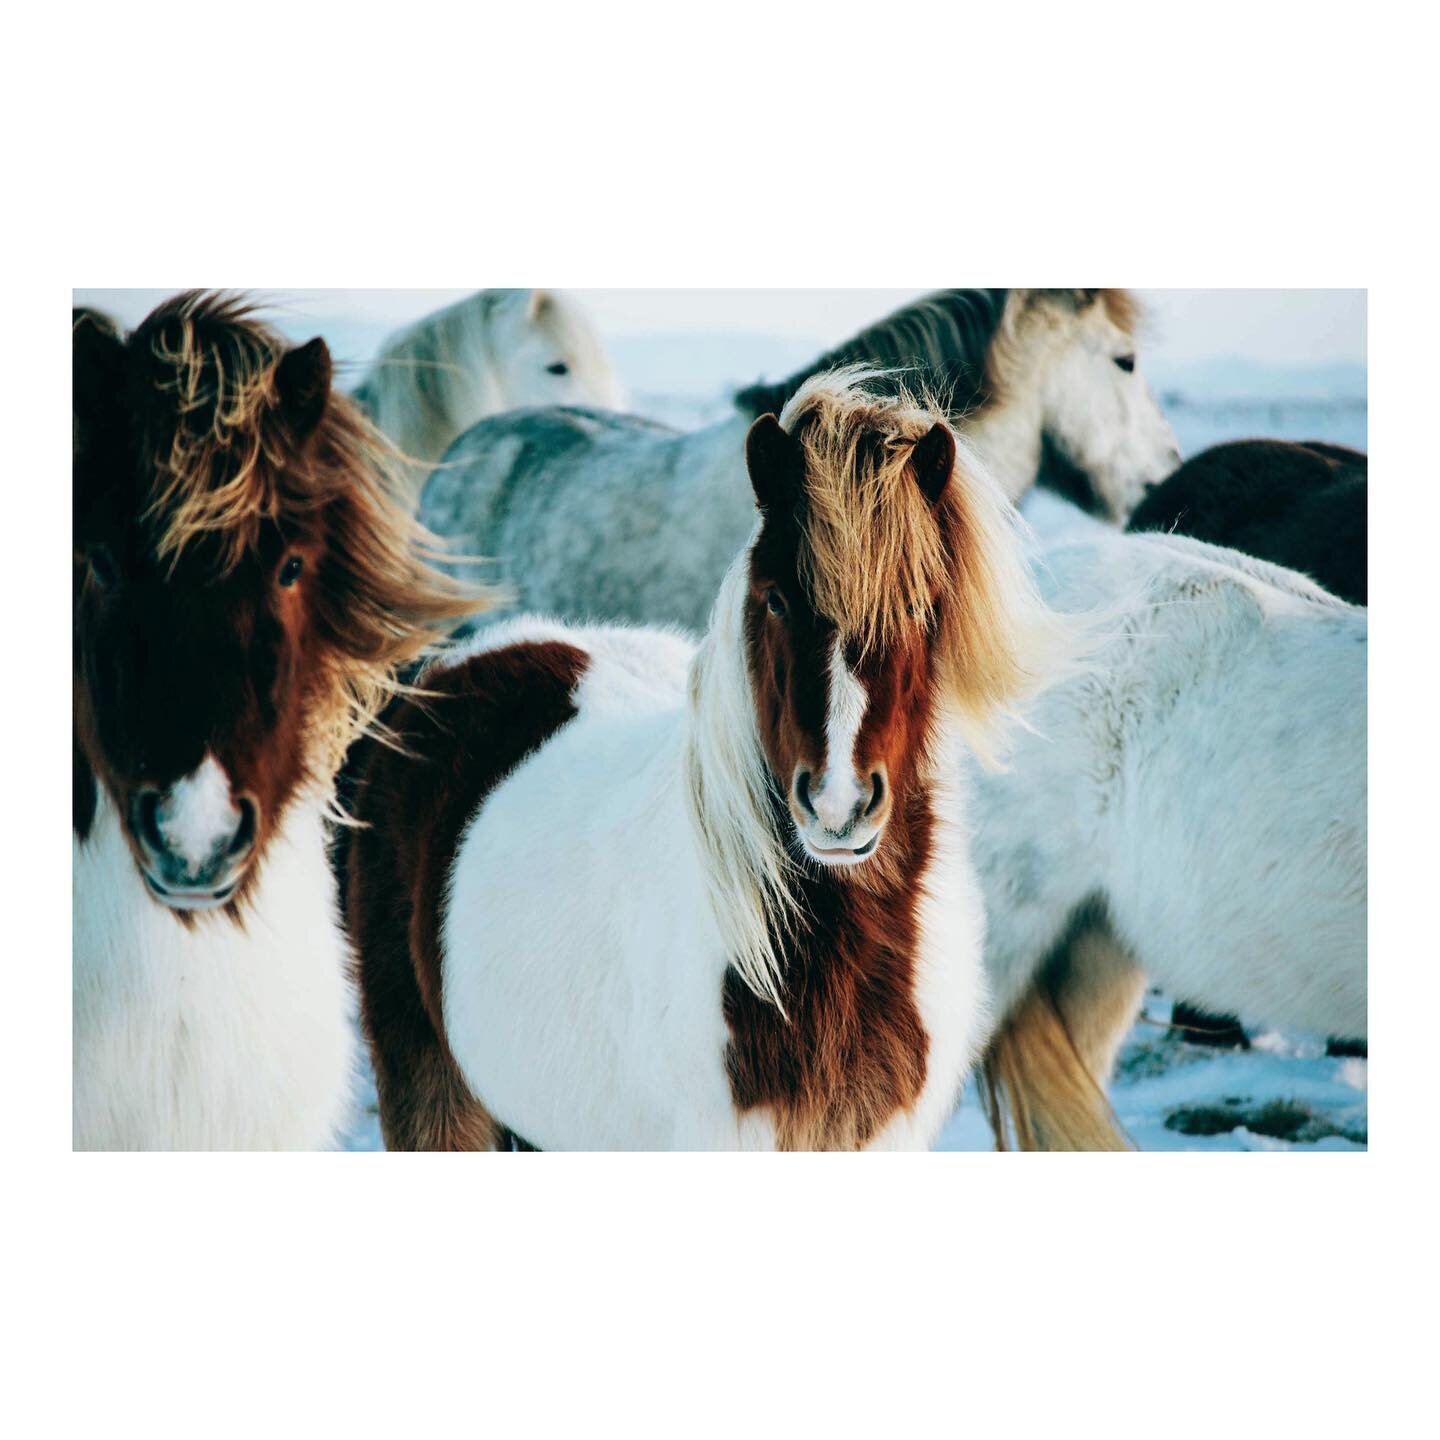 January 2015: I was 21, exploring Iceland in the cheapest rental car possible. These horses enjoyed a good blizzard and were unphased by the incoming weather. 

I will be posting a series of my favorite photos taken over the last 20 years. I started 